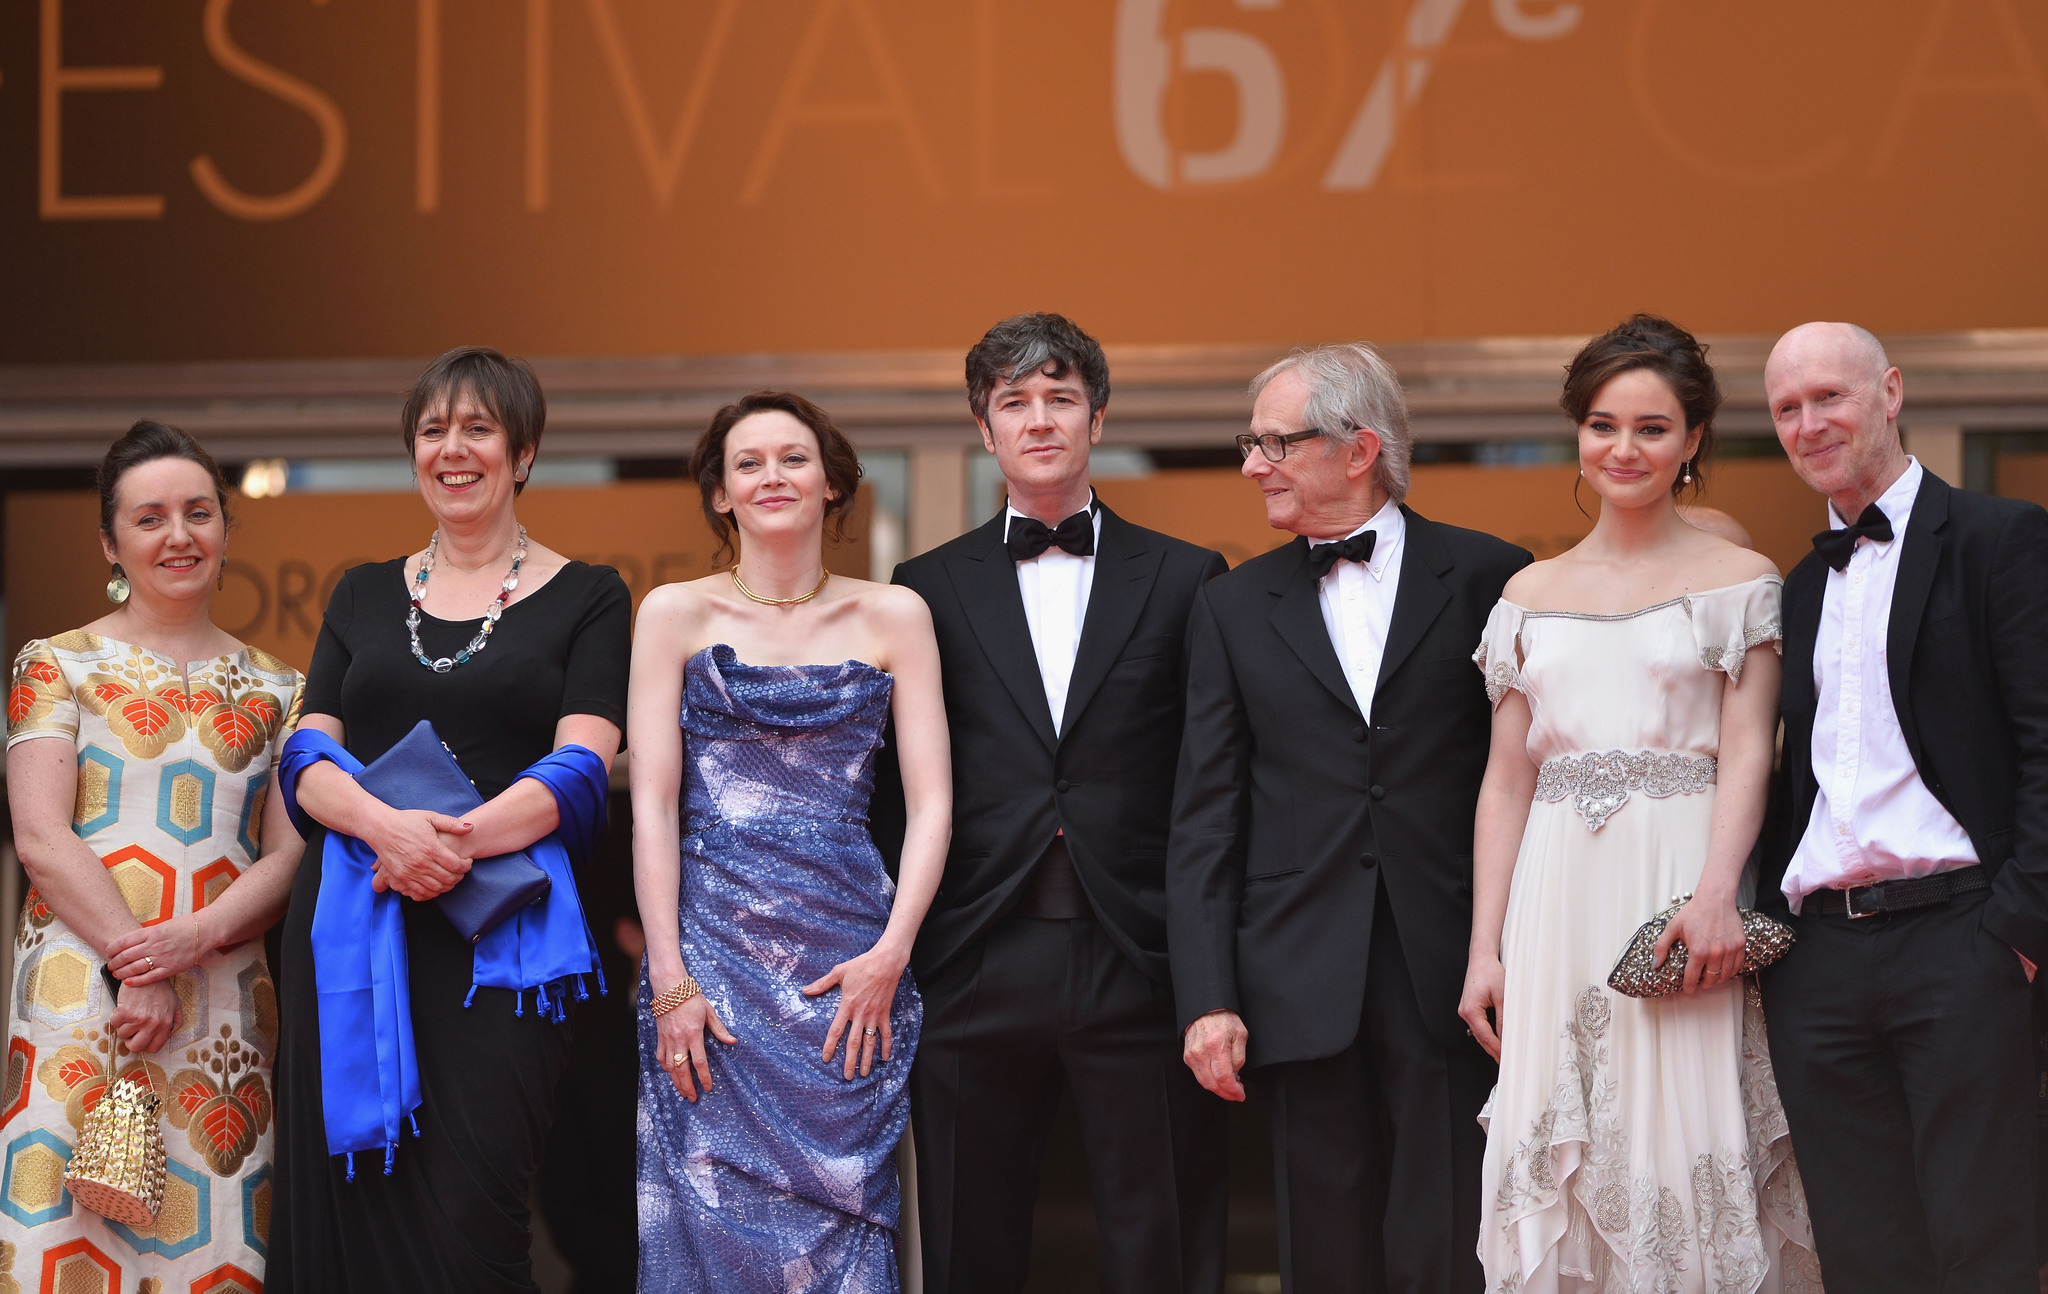 Paul Laverty, Ken Loach, Rebecca O'Brien, Barry Ward, Simone Kirby and Aisling Franciosi at event of Jimmy's Hall (2014)